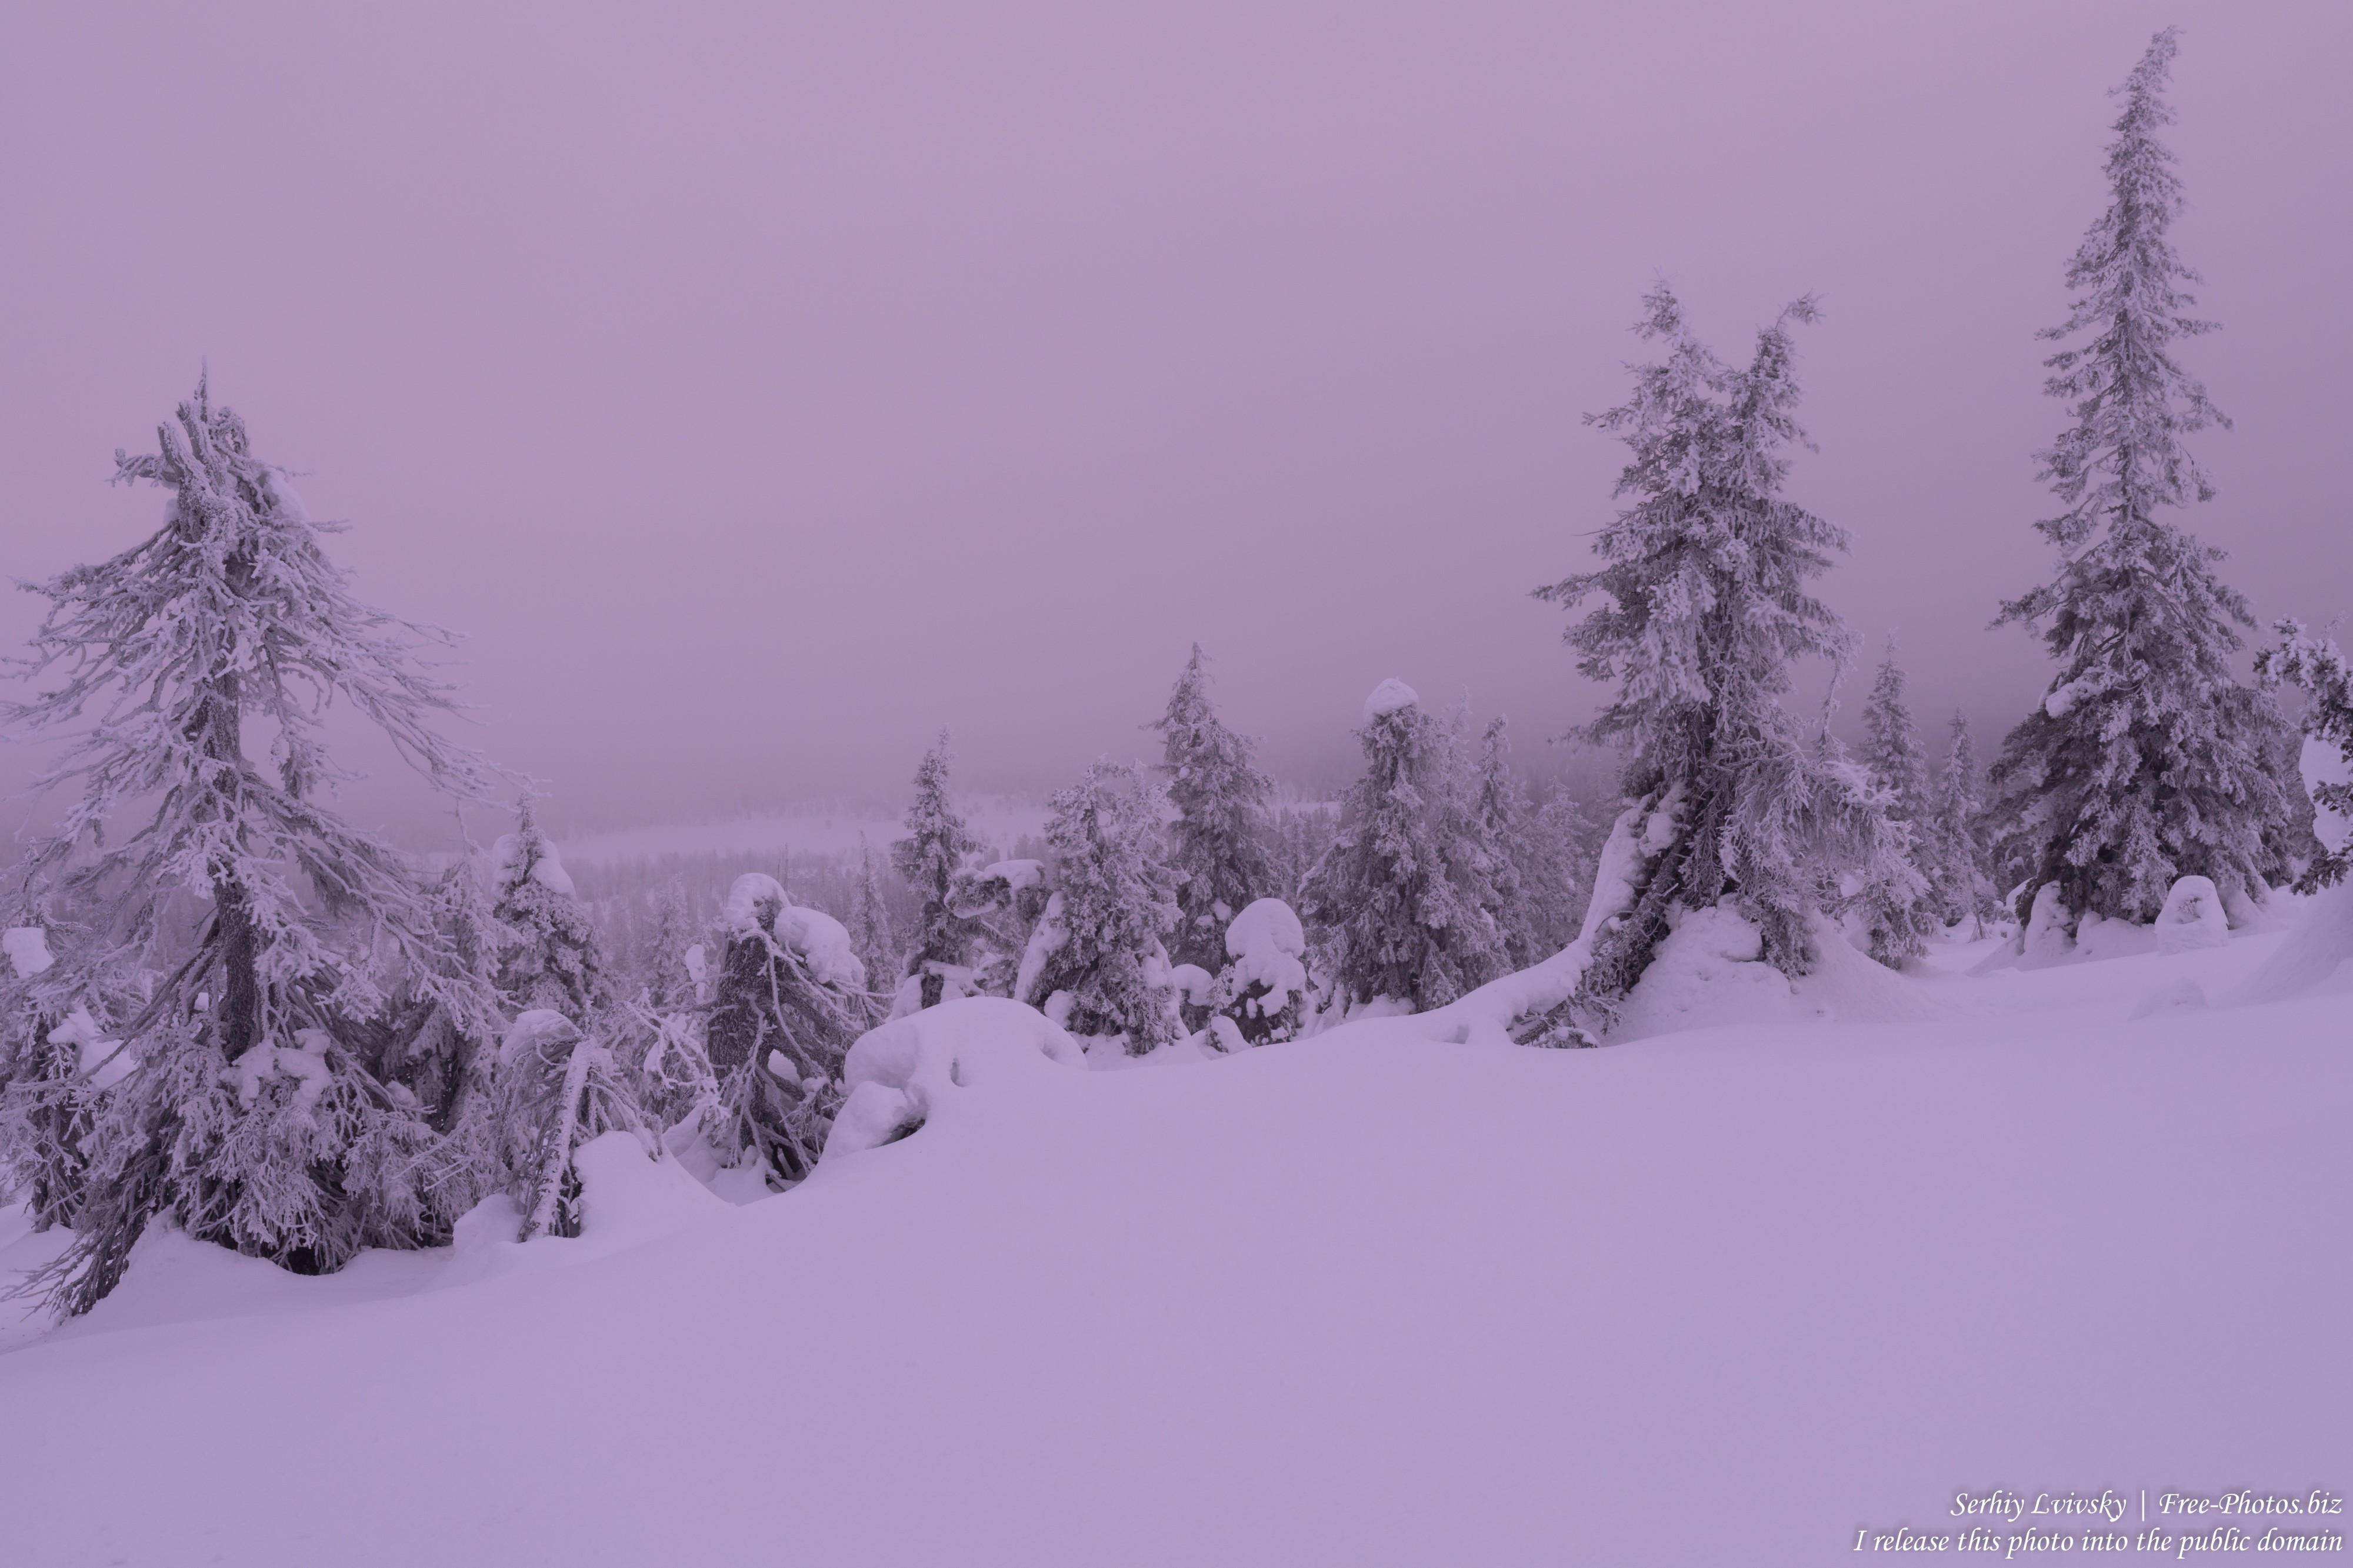 Riisitunturi, Finland, photographed in January 2020 by Serhiy Lvivsky, picture 13